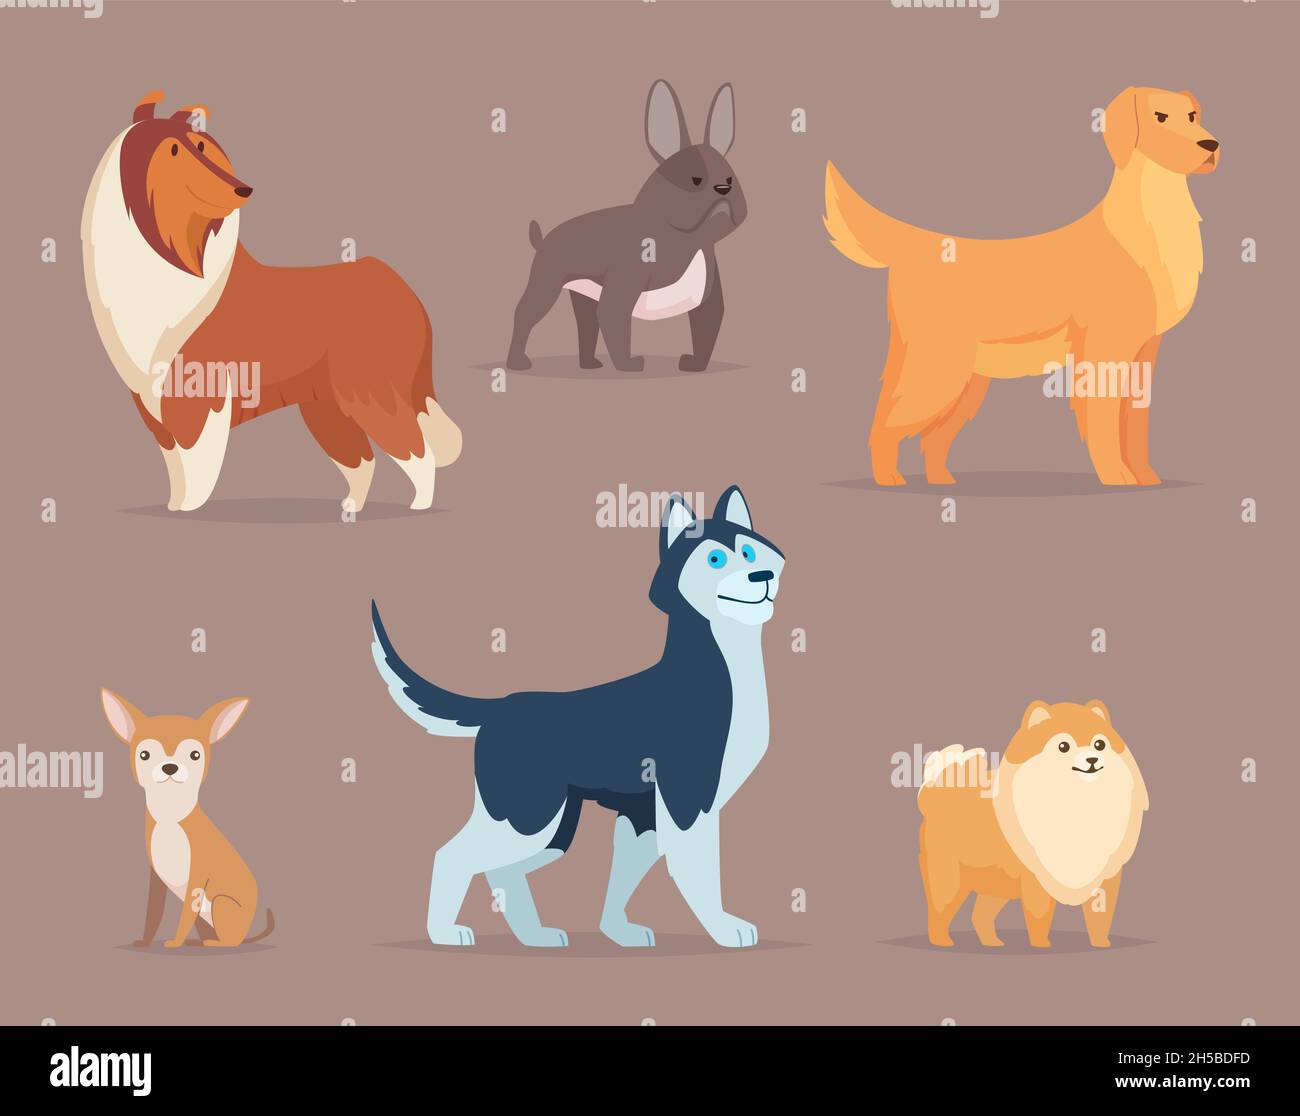 Dogs breeds. Domestic animals funny puppy sitting walking jumping terrier bulldog poodle dachshund exact vector cartoon illustrations of dogs Stock Vector